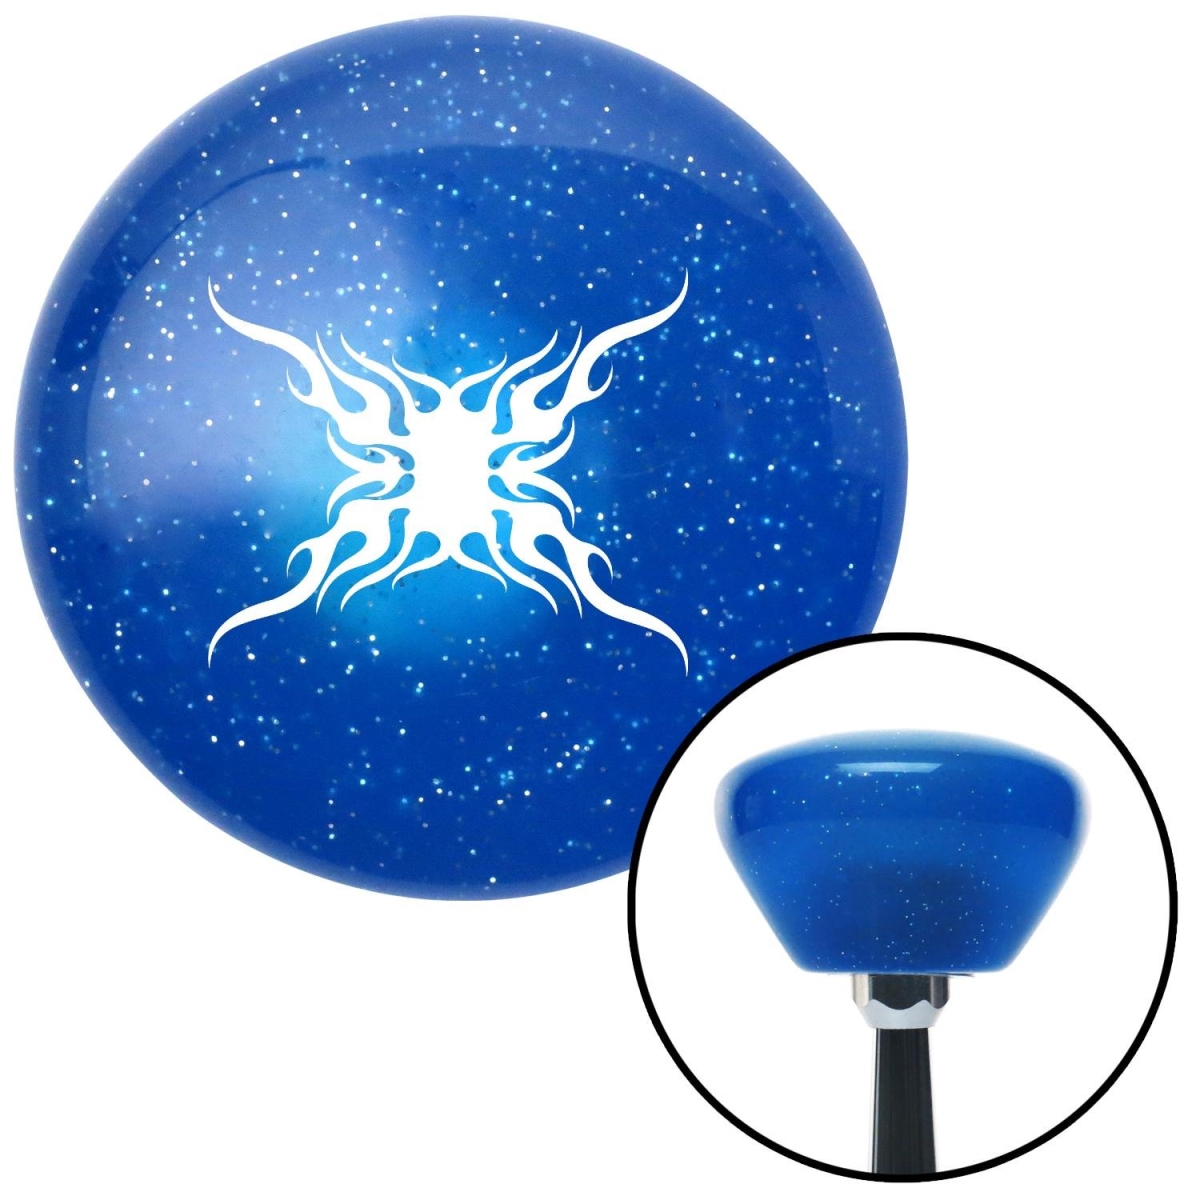 American Shifter 185571 White Super Large Tribal Flames Blue Retro Metal Flake Shift Knob with M16 x 1.5 Insert -  American Shifter Company